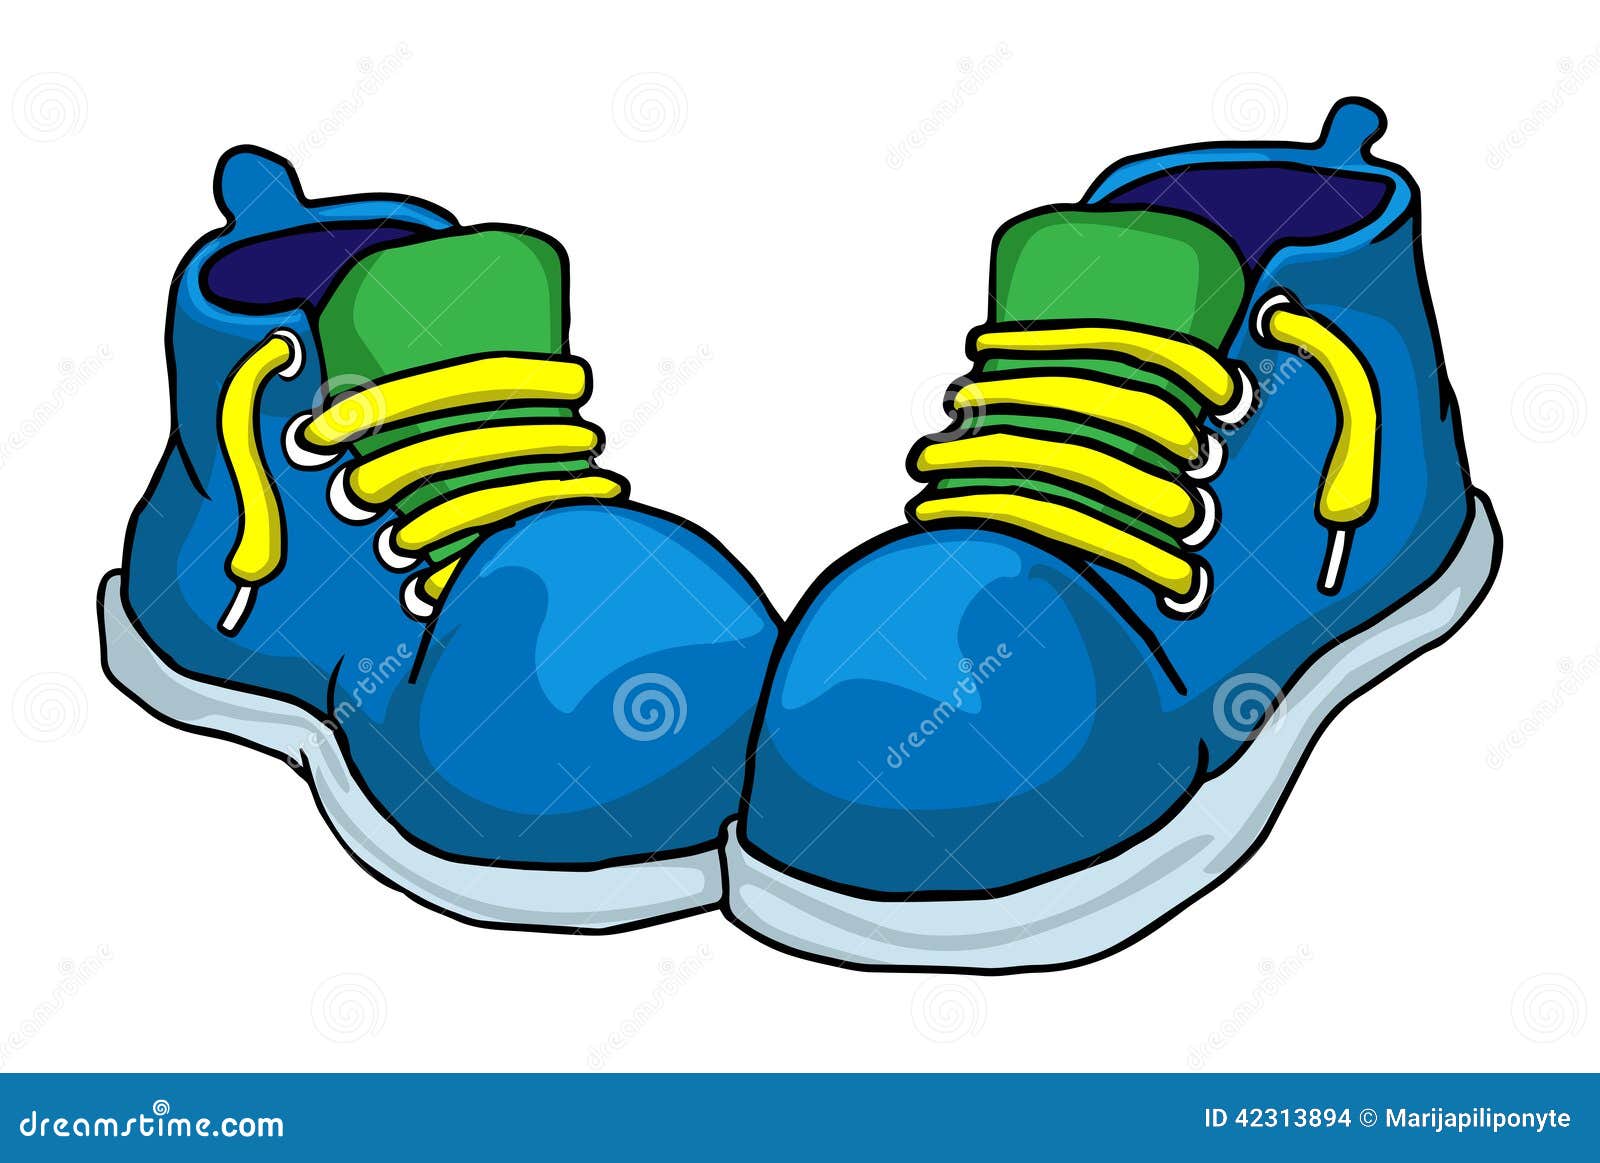 funny shoe clipart - photo #50